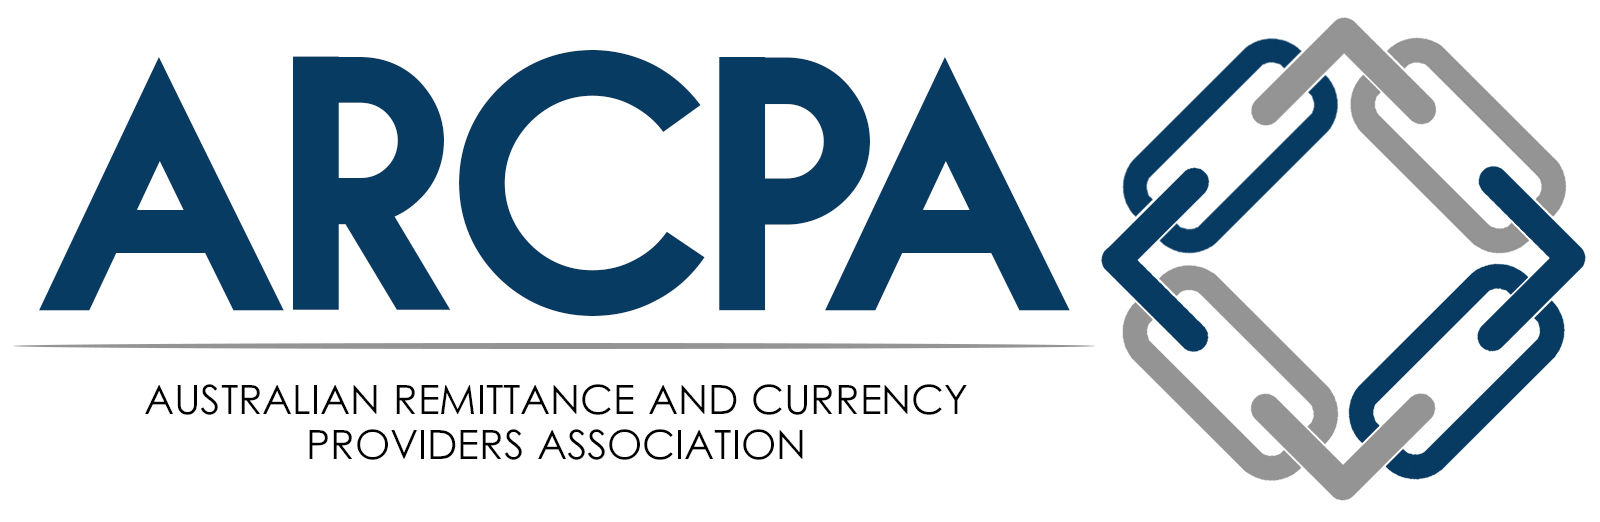 Australian Remittance and Currency Providers Association